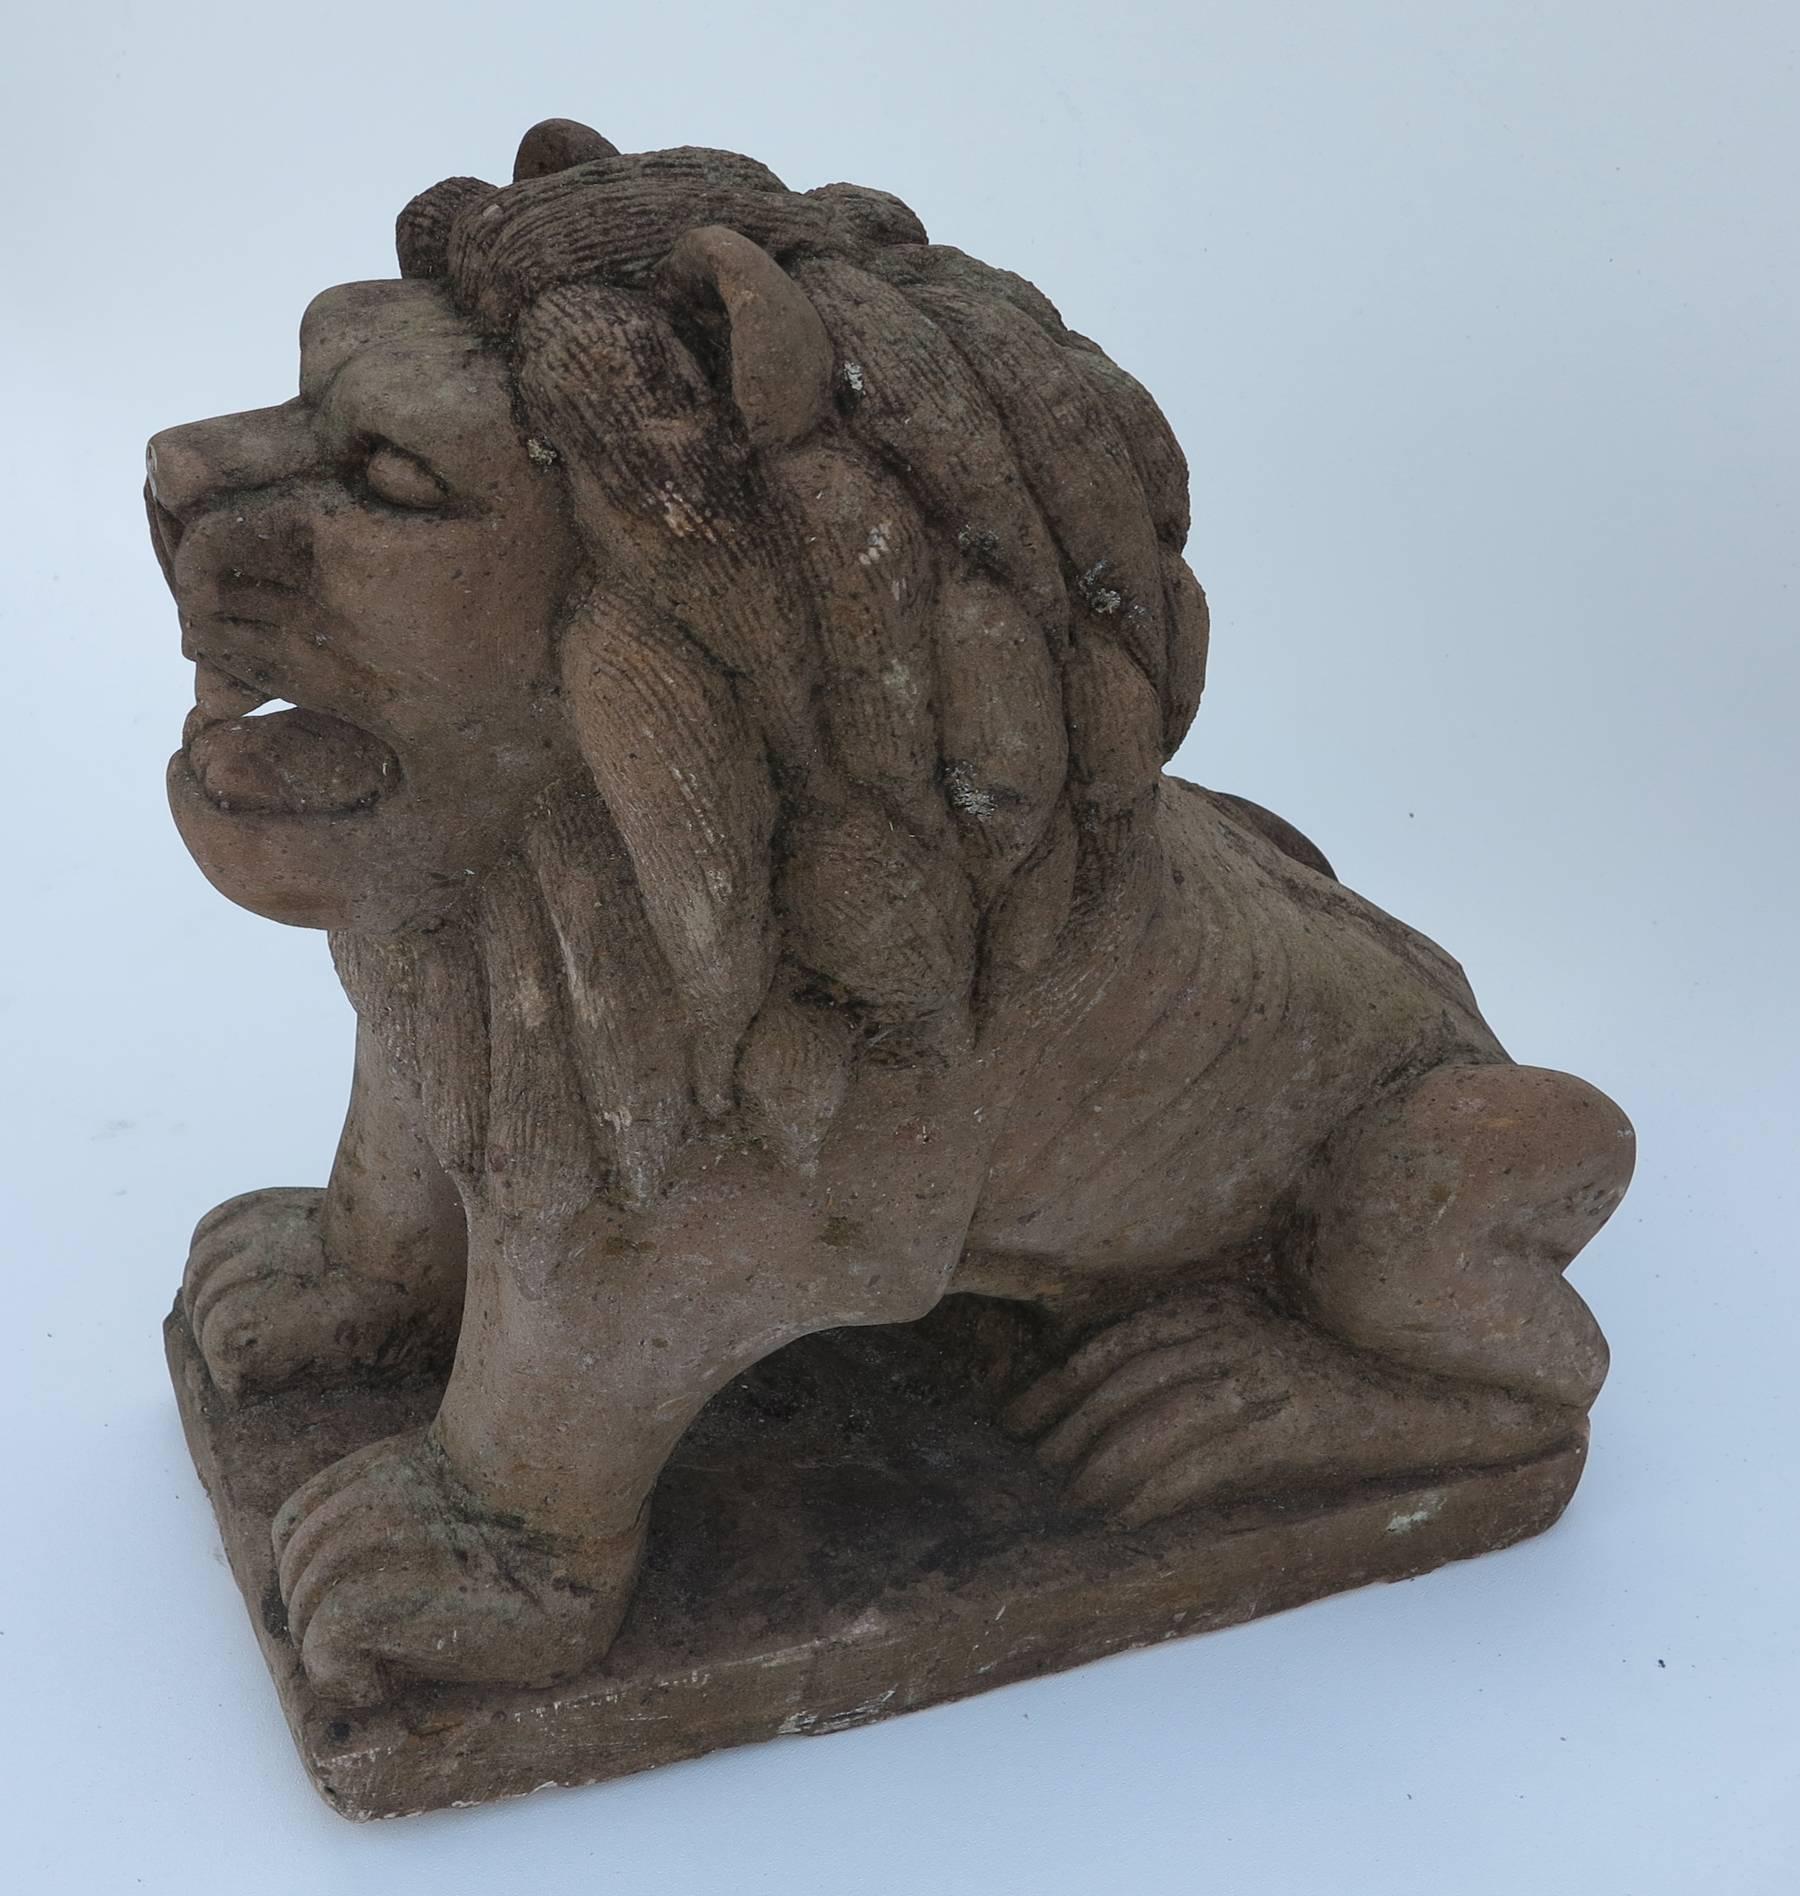 Cast cement Petite lions with terra cotta finish. Nice aged patina graceful entry lions. Small-scale. Measures: 16 wide by 16.5 high by 7.5 deep.